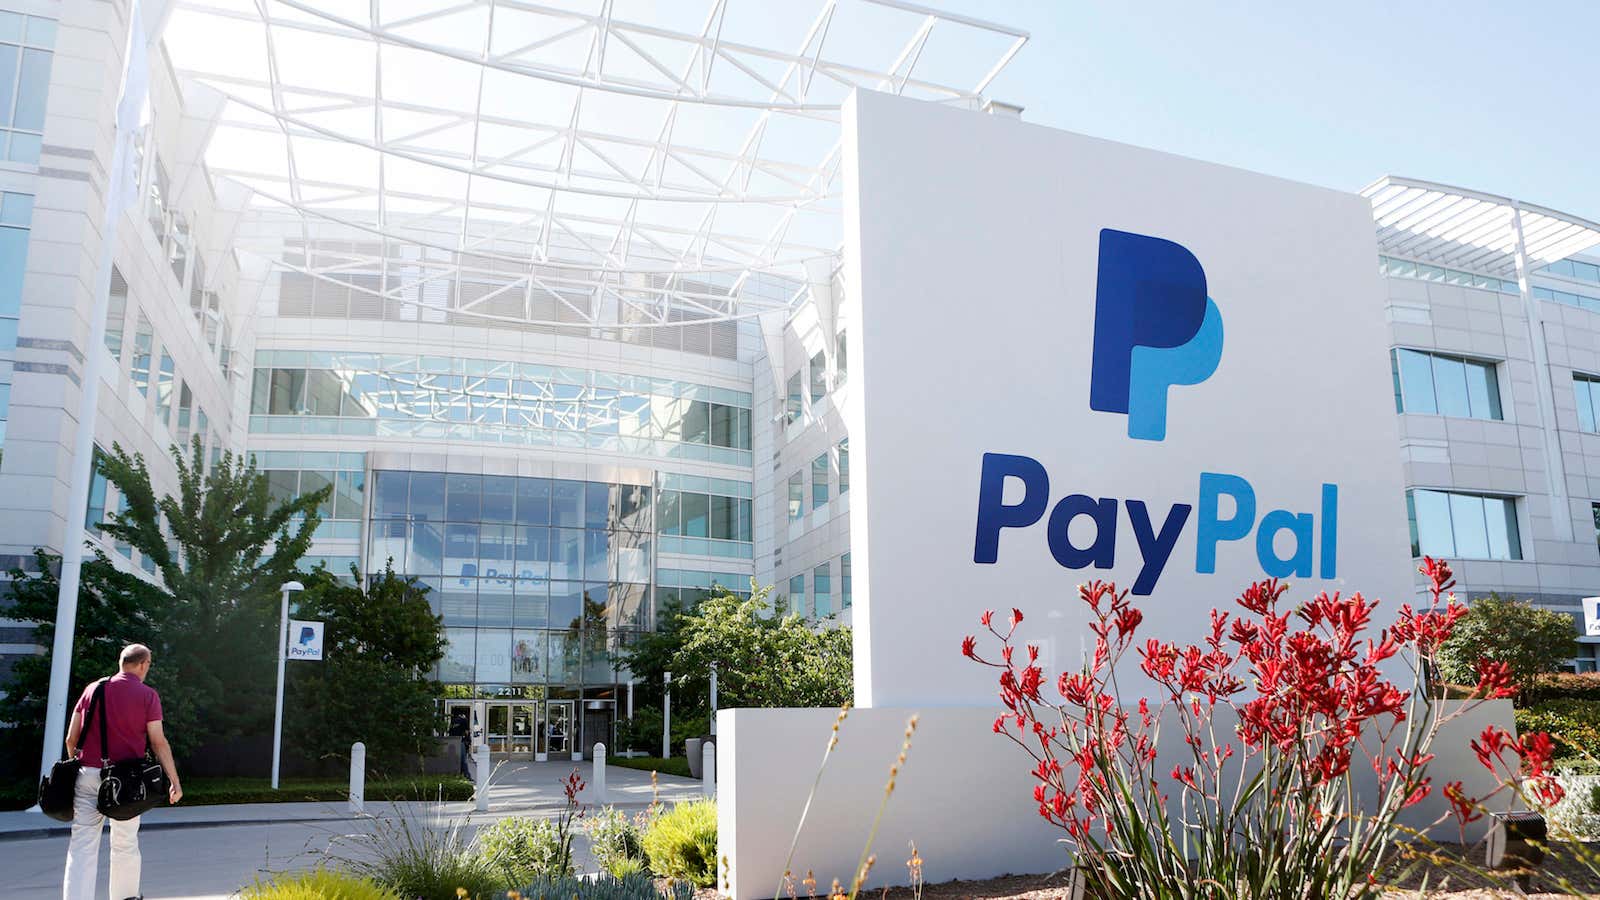 PayPal is embracing bitcoin and virtual currency.